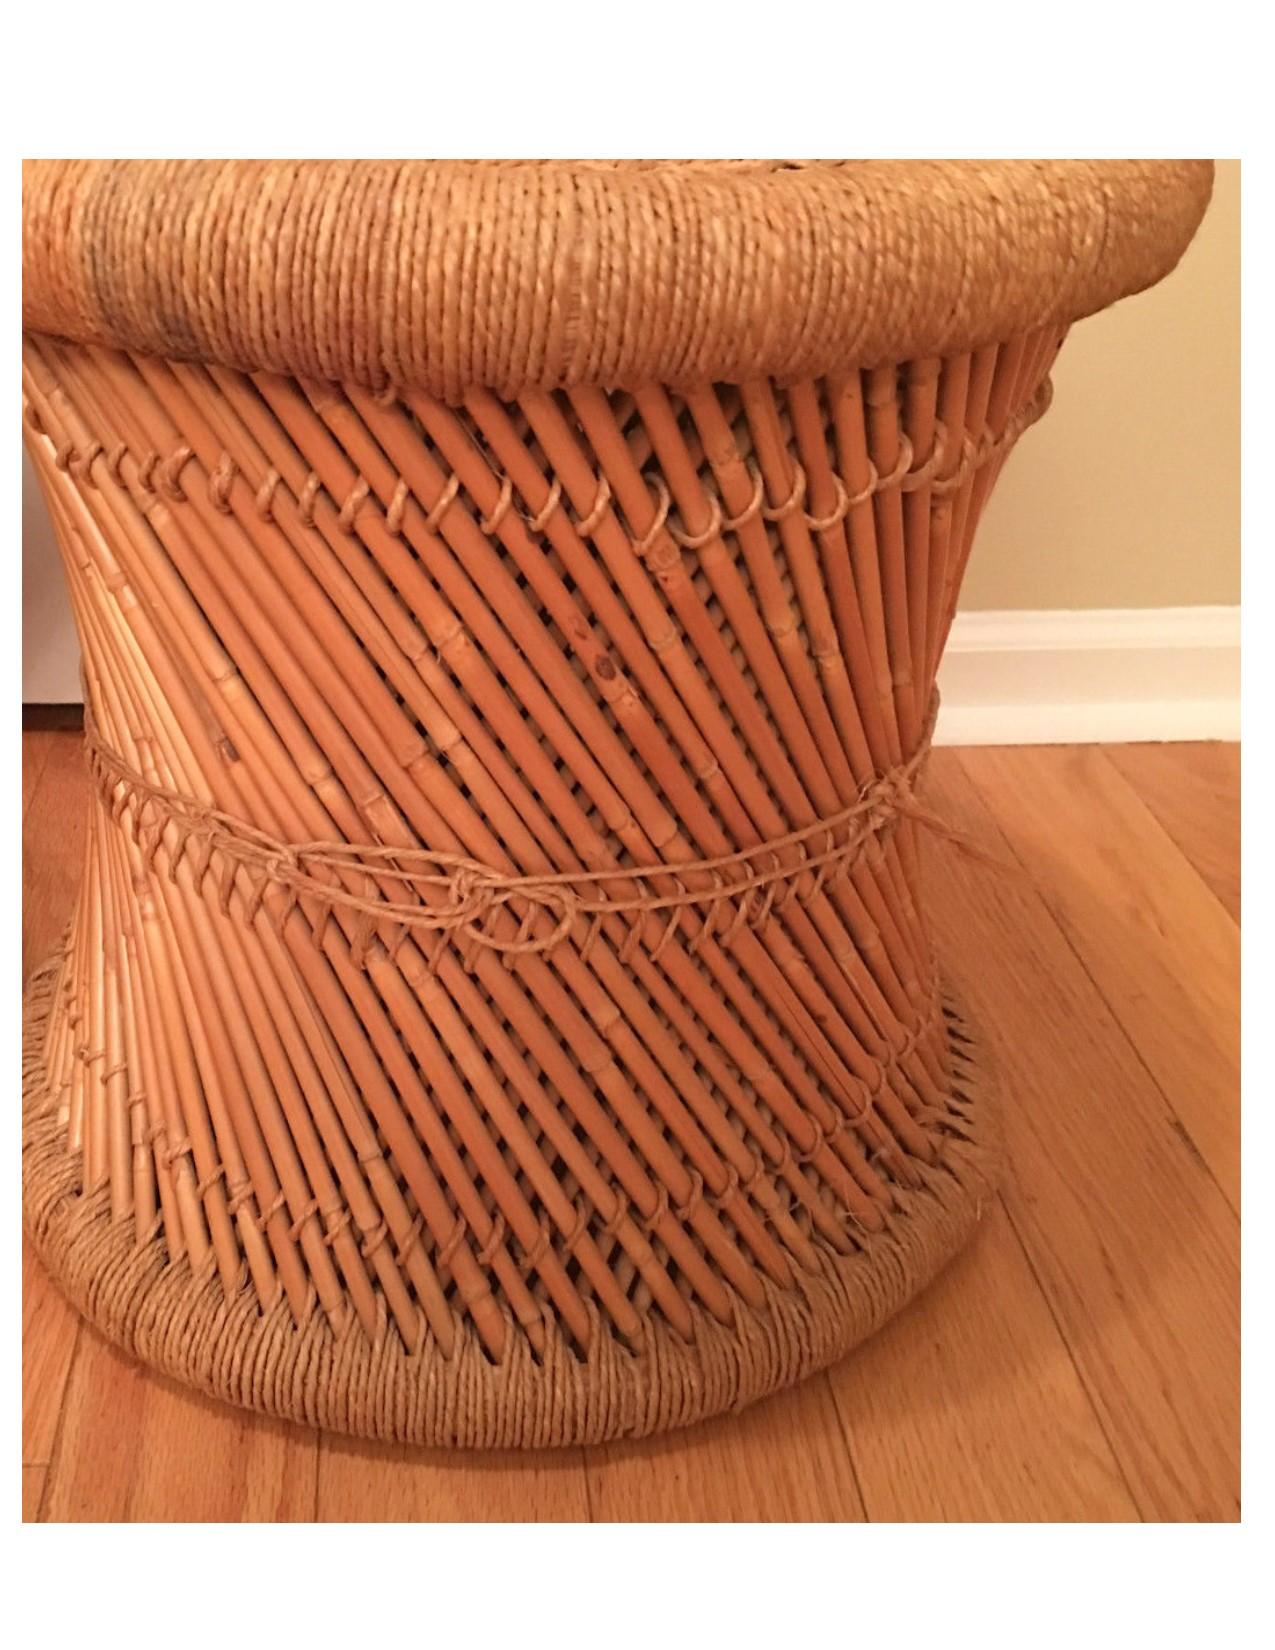 Sturdy and handsome natural reed body with woven rush top and accents stool, popularized by California craftsmen in the 1960s-1970s. Note the basket weave motif in the top woven area. With the addition of a round glass top, the stool could easily